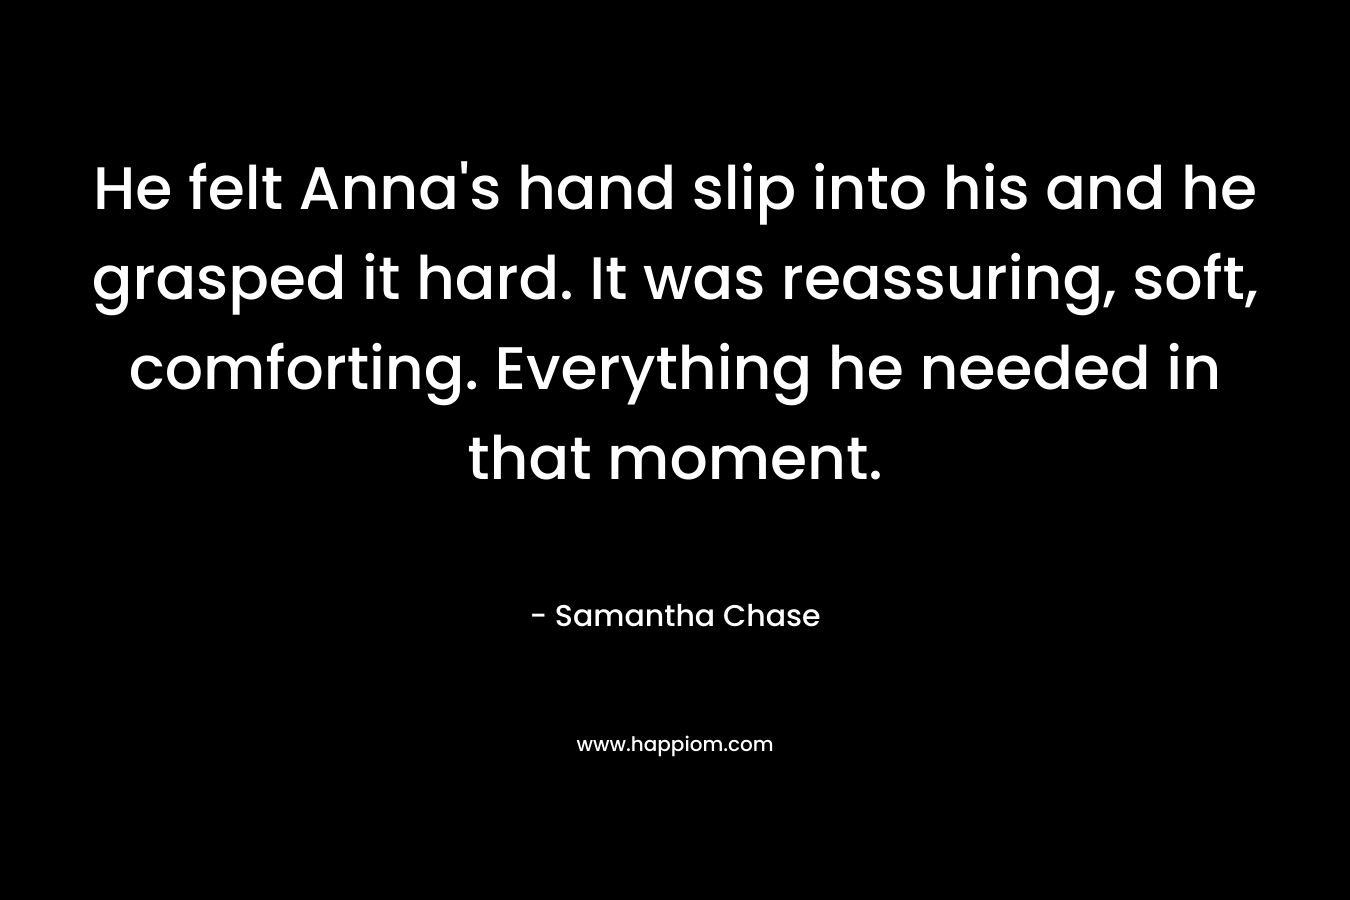 He felt Anna’s hand slip into his and he grasped it hard. It was reassuring, soft, comforting. Everything he needed in that moment. – Samantha Chase